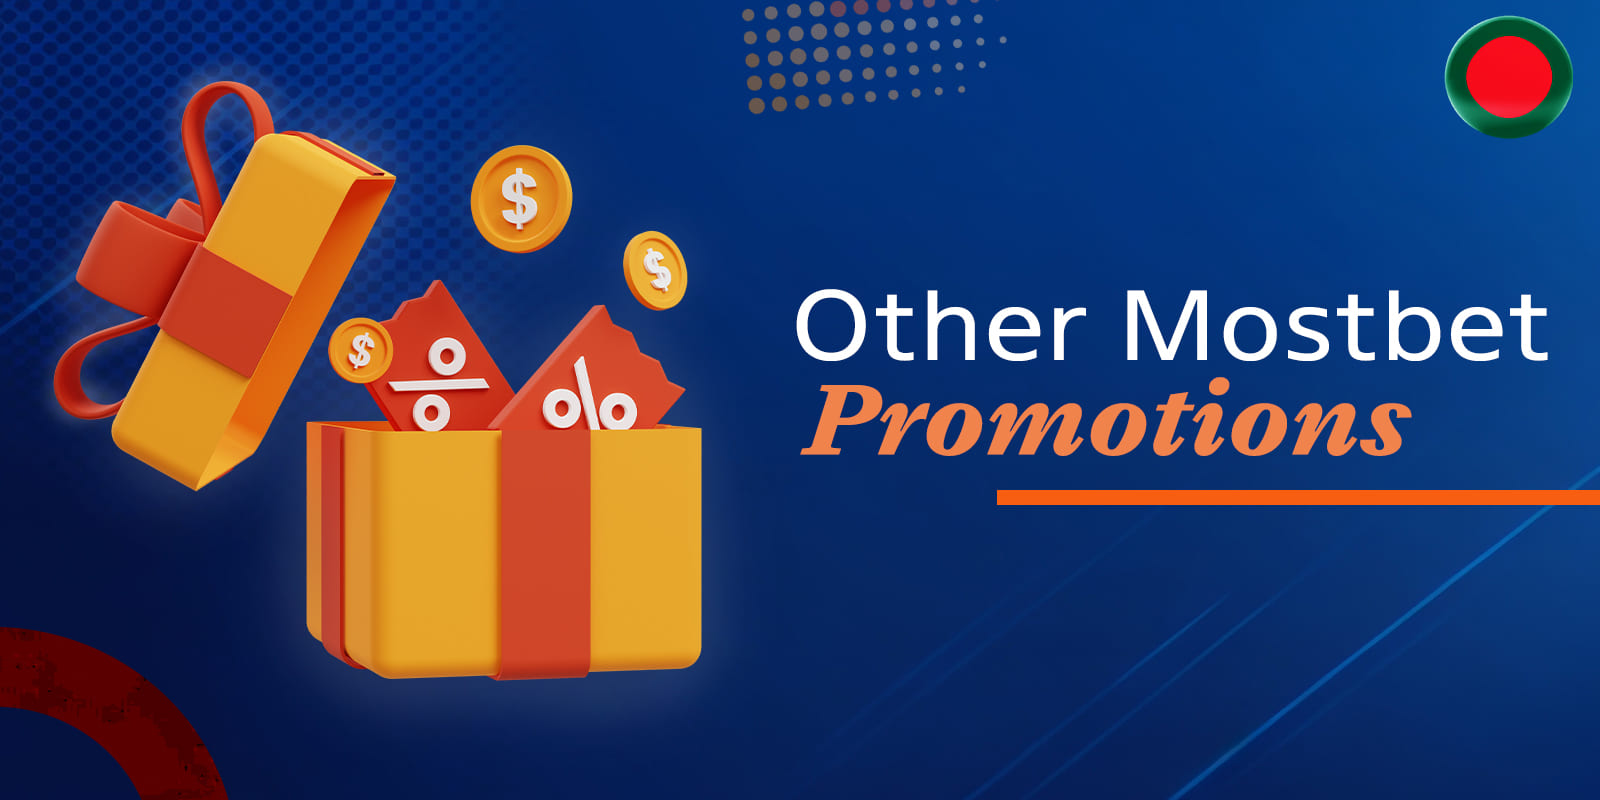 All promotions from Mostbet